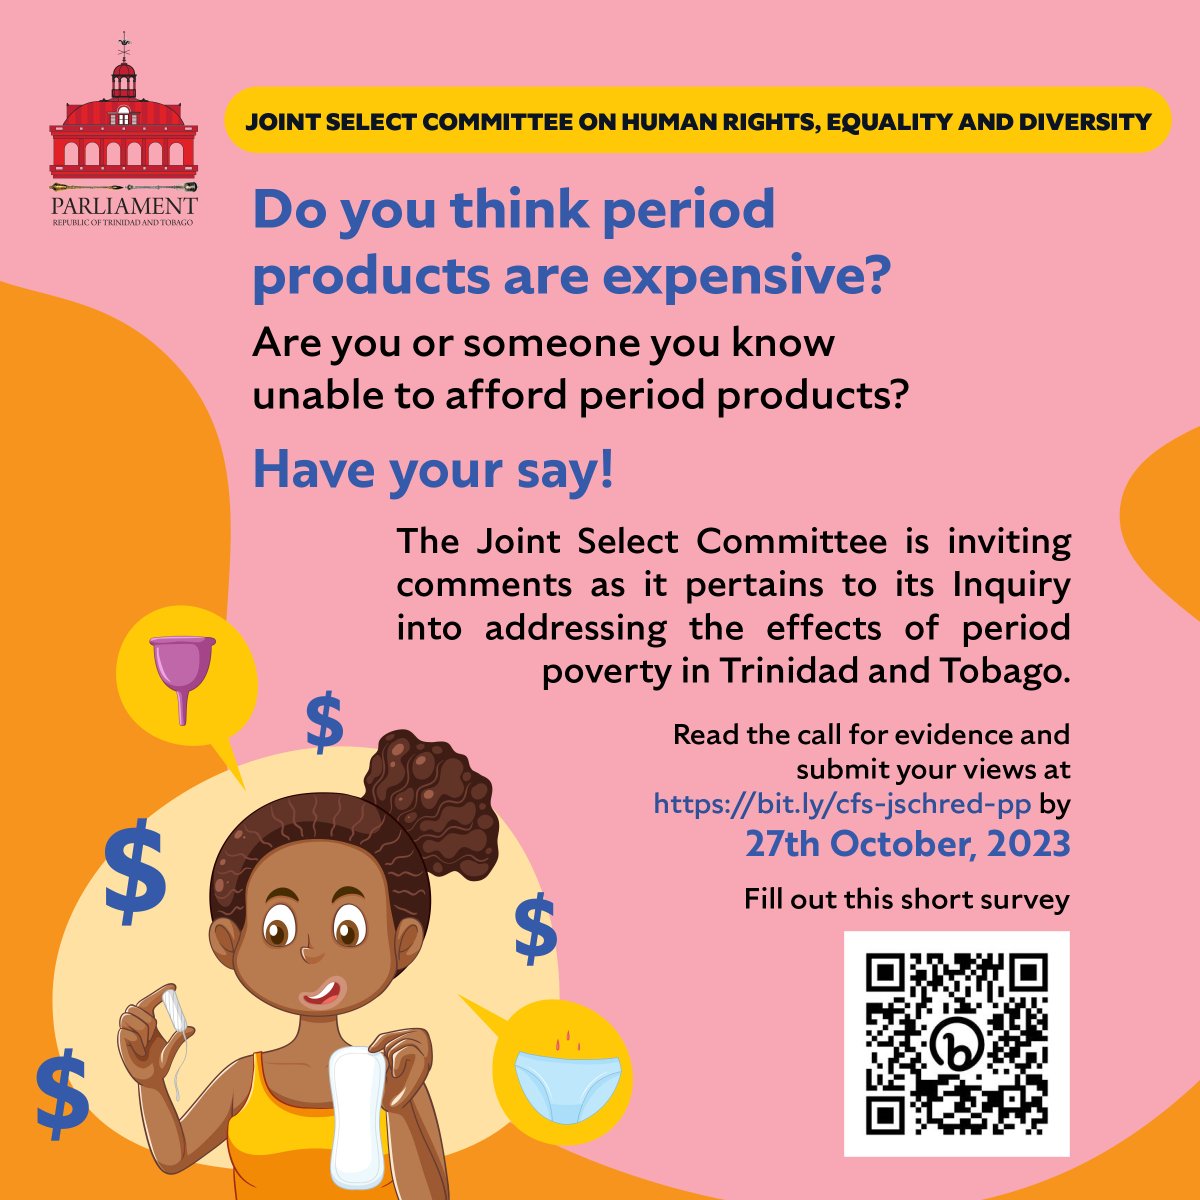 The JSC on Human Rights, Equality and Diversity has commenced an inquiry into the issue of period poverty in Trinidad and Tobago. Fill out our short survey bit.ly/jschredsurvey, read the call for evidence bit.ly/cfs-jschred-pp and submit your views by October 27th 2023.